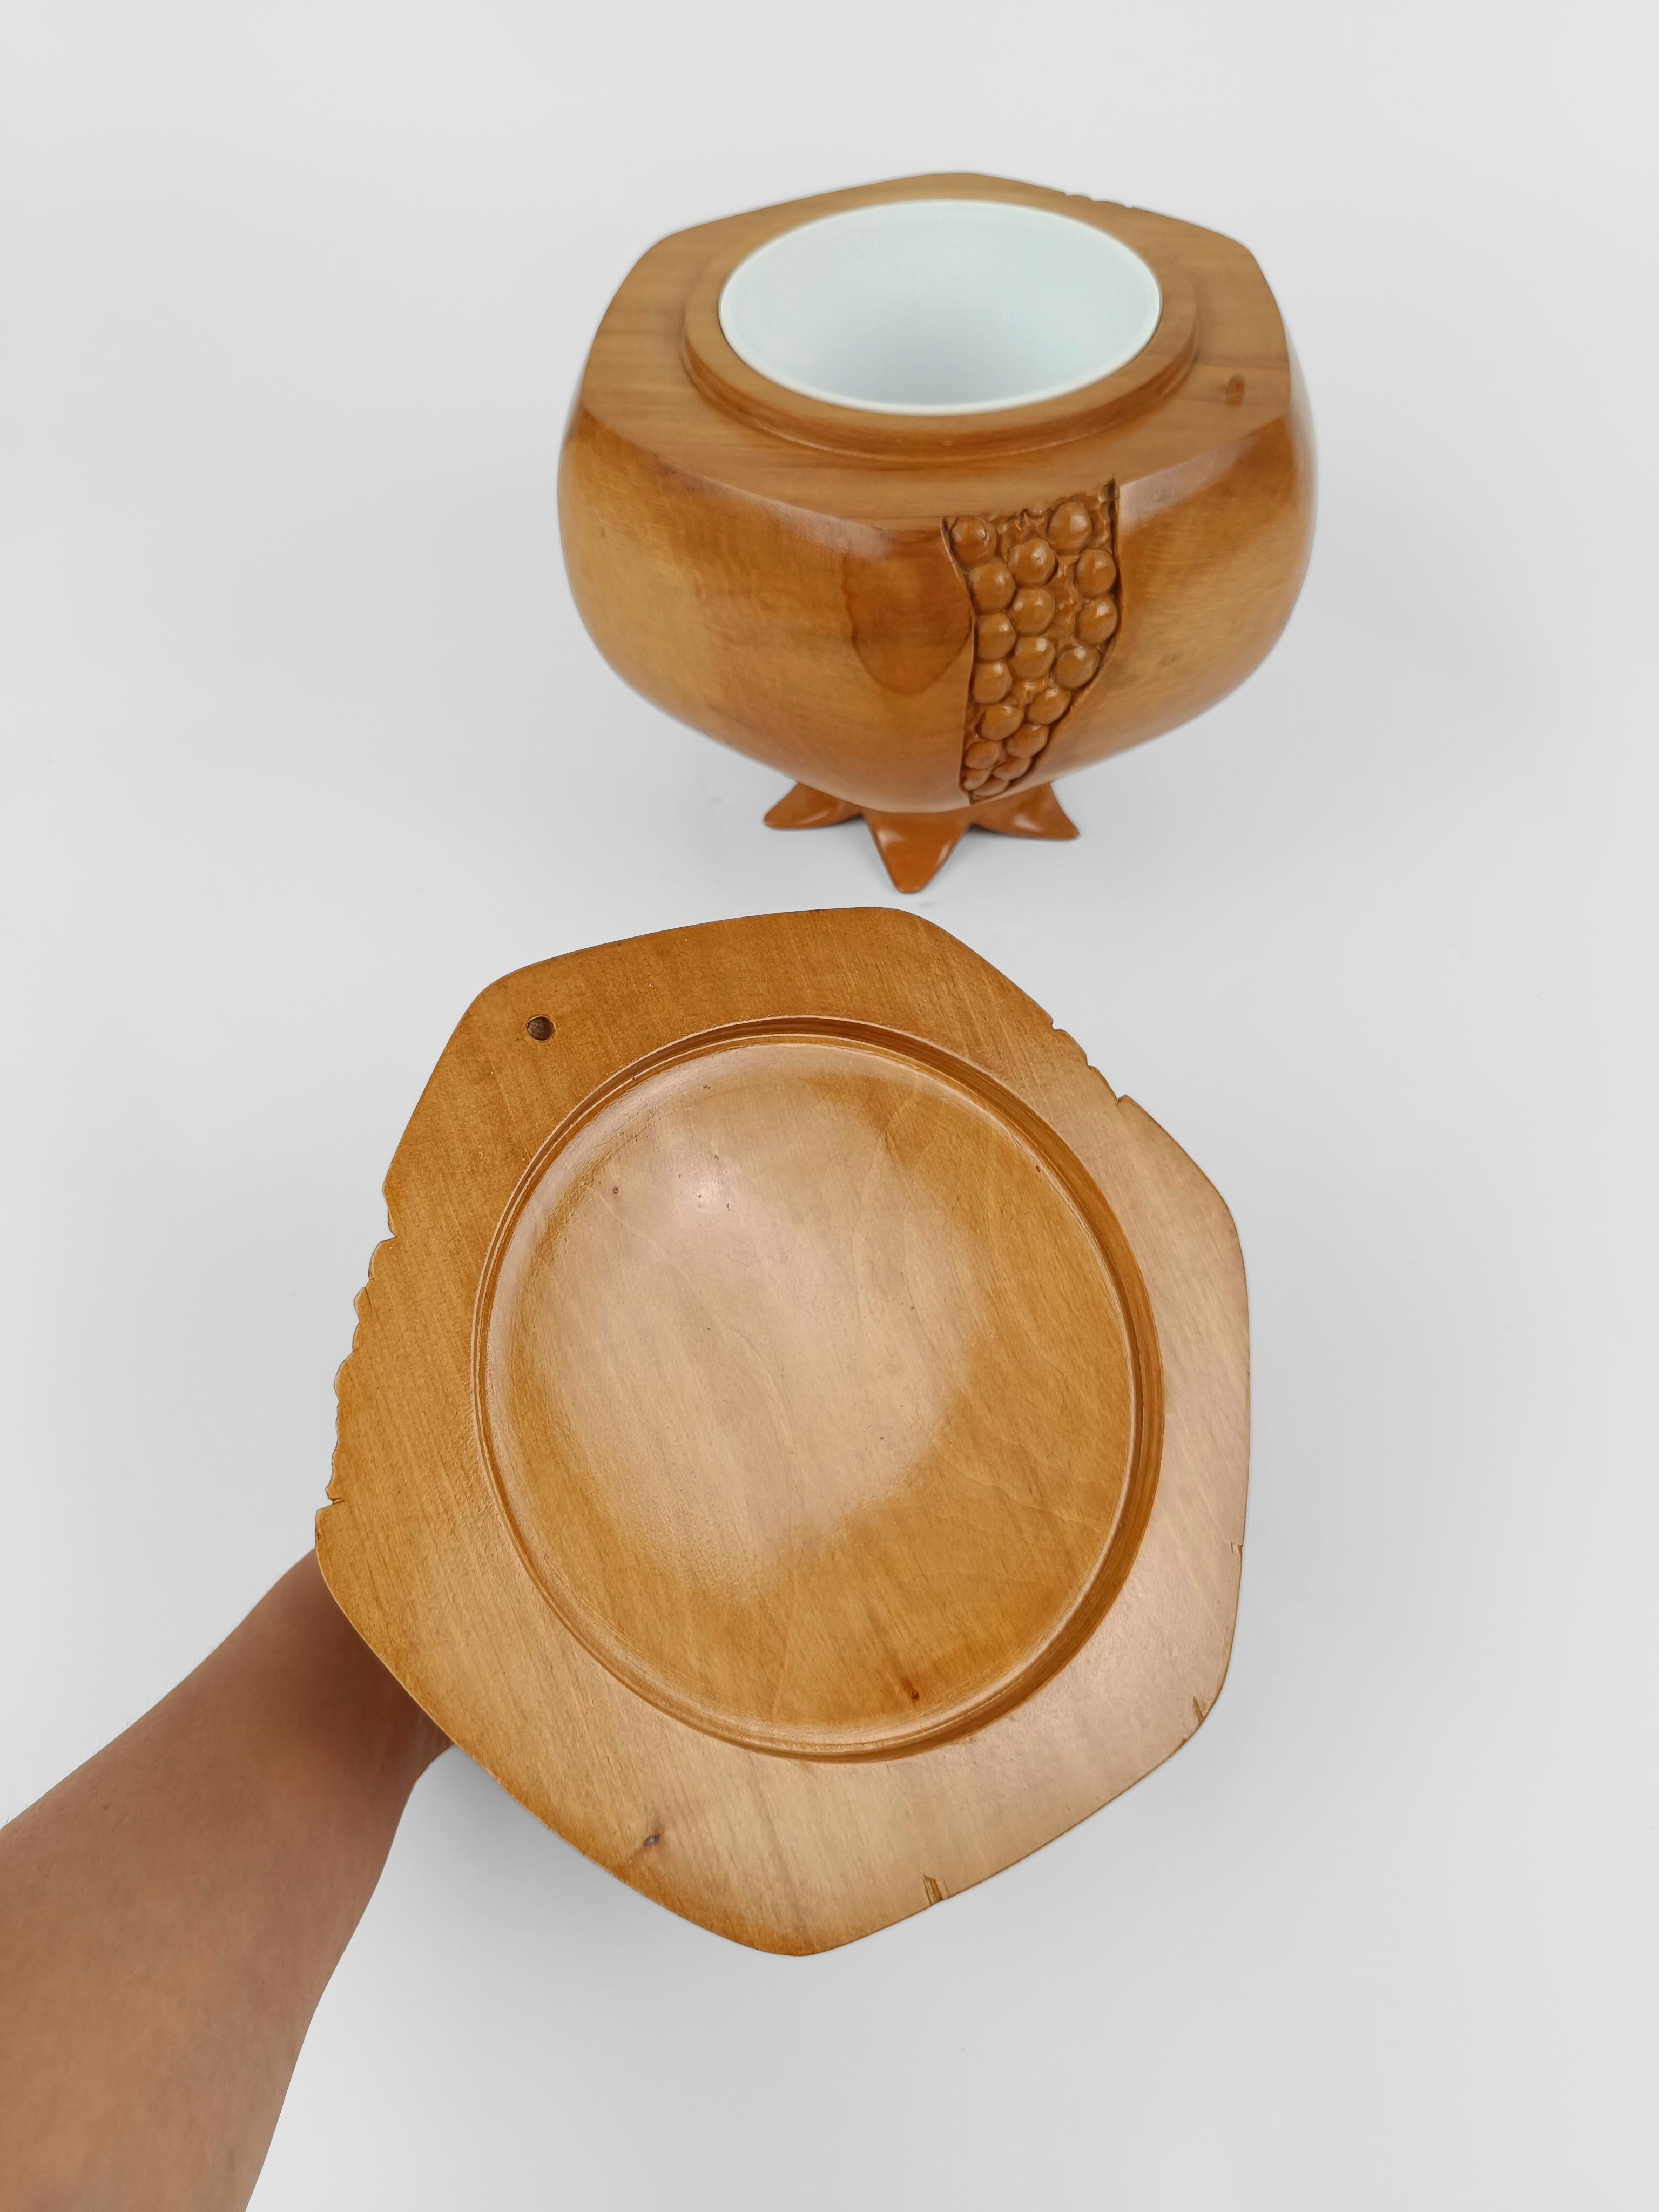 Sculptural Vintage Ice Bucket in maple wood carved in the shape of a pomegranate For Sale 5